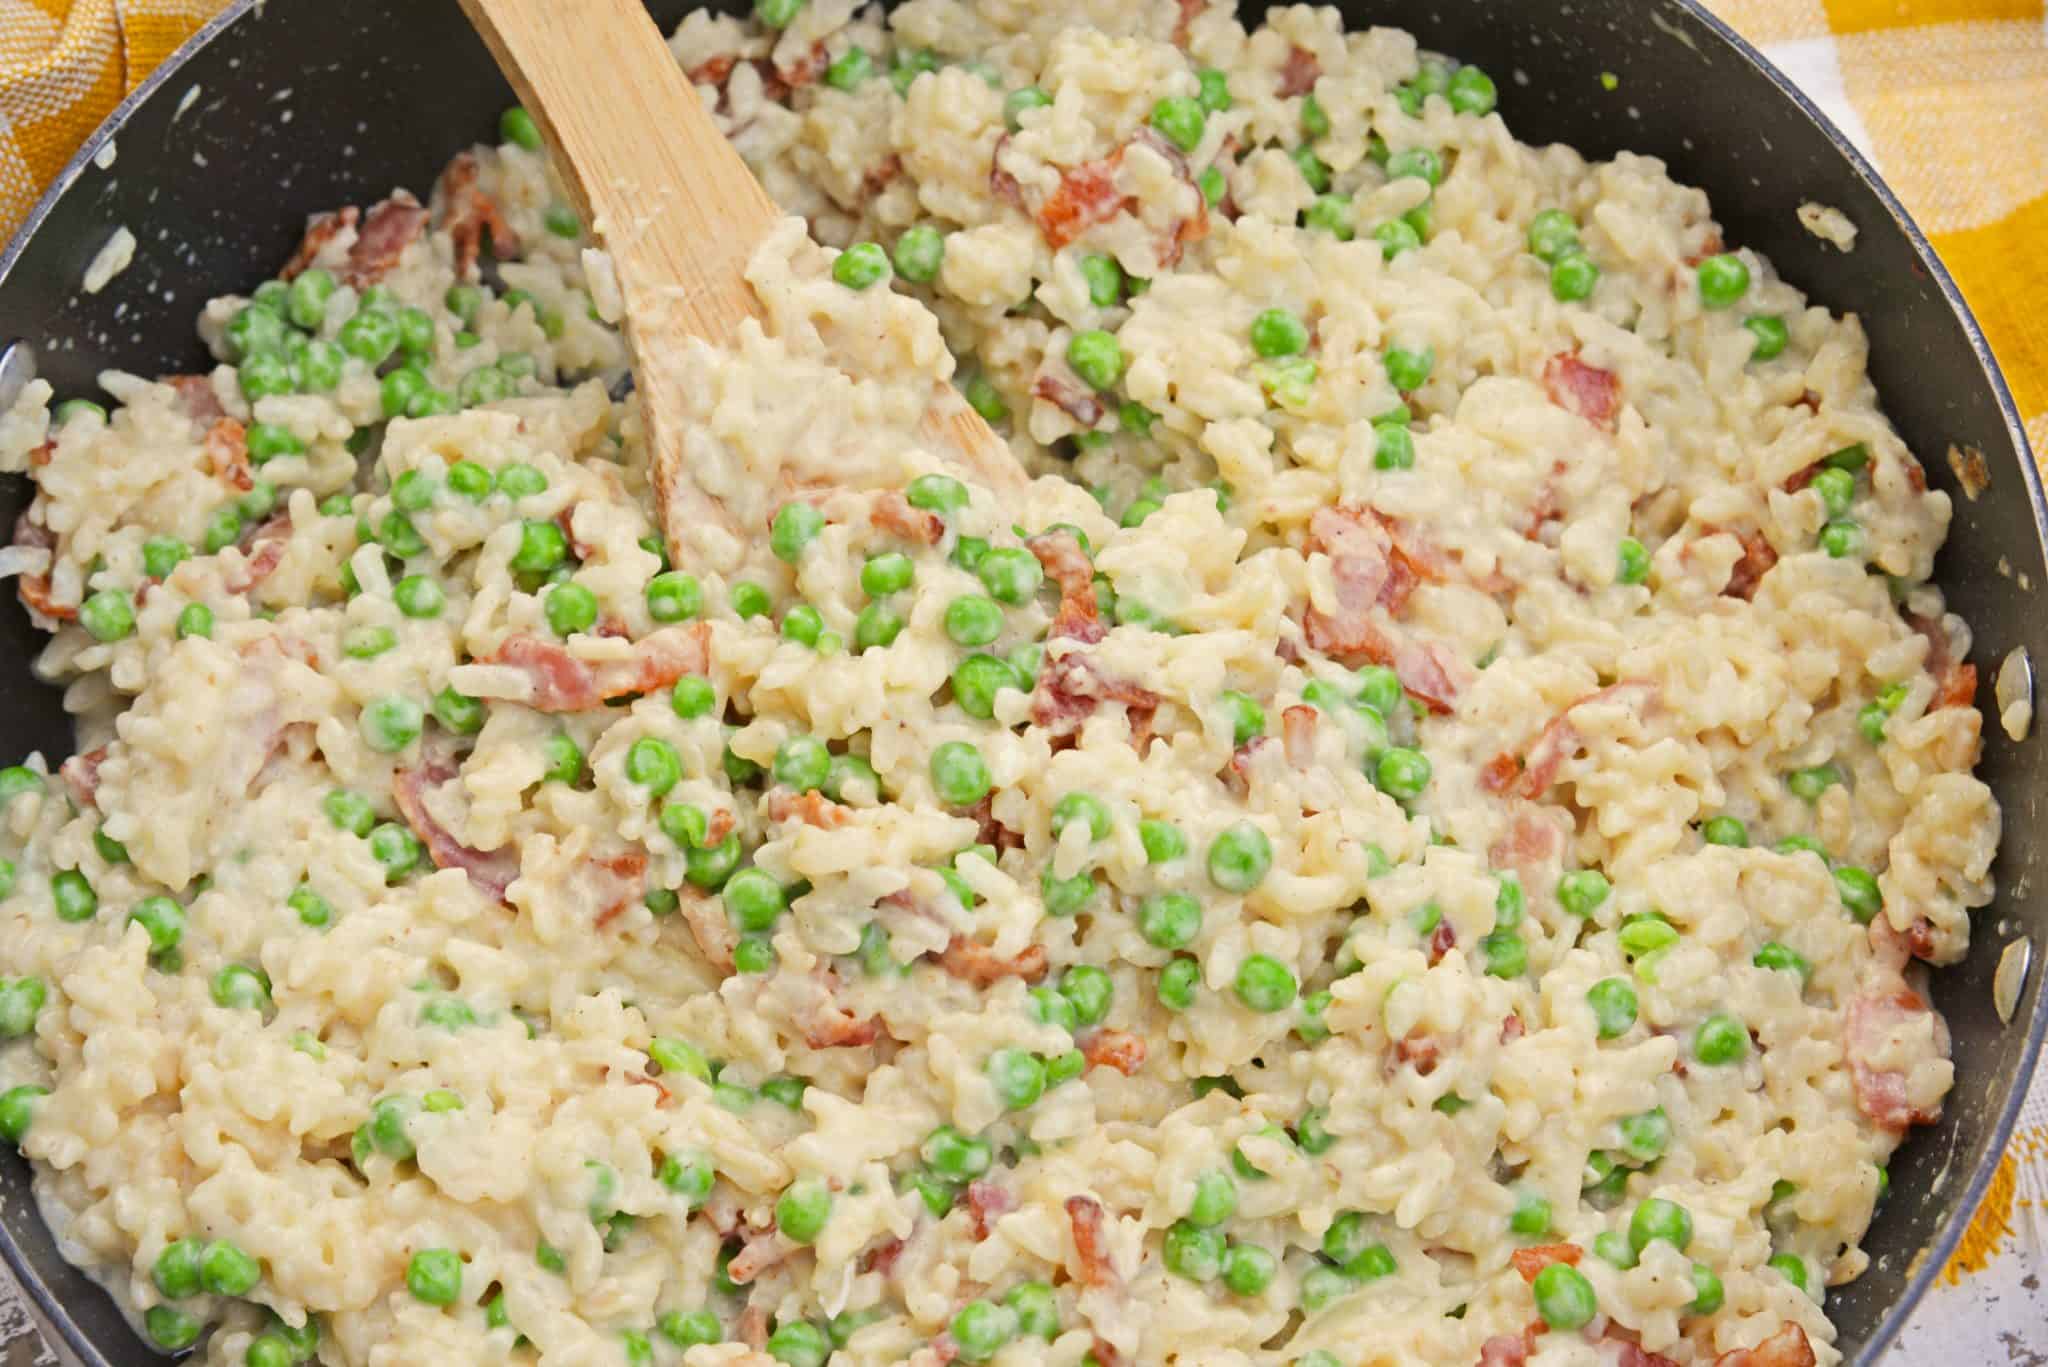 Creamy Parmesan Risotto takes the most traditional risotto recipe and adds vibrant peas and crispy bacon. Sauteed in bacon fat, this rice packs a flavor punch! #parmesanrisottorecipe #easyrisottorecipe www.savoryexperiments.com